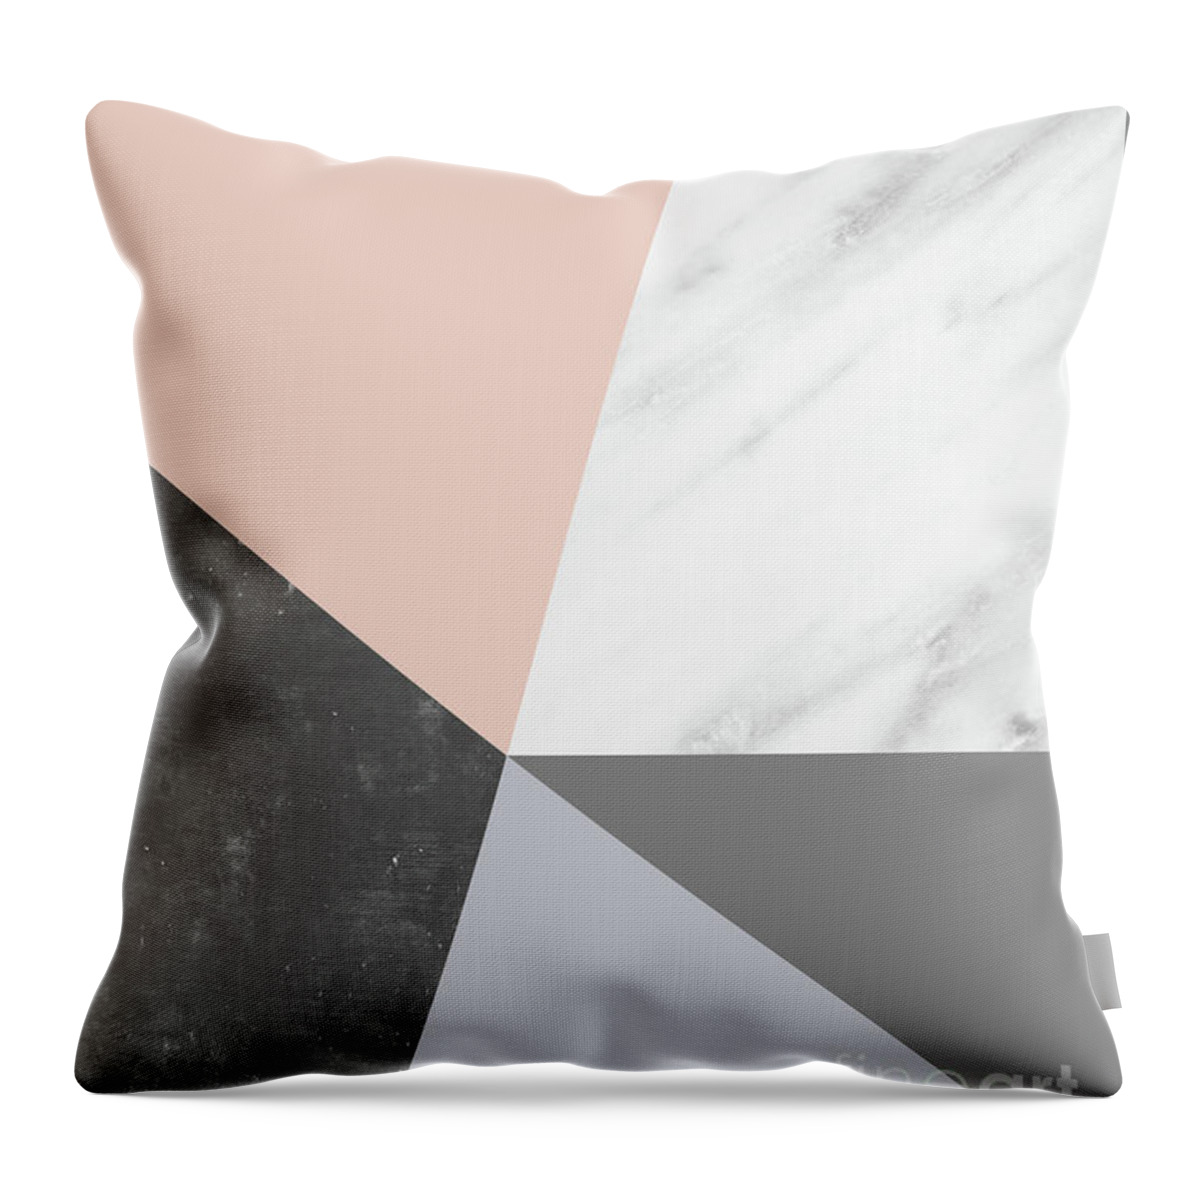 Winter Throw Pillow featuring the mixed media Winter Colors Collage by Emanuela Carratoni